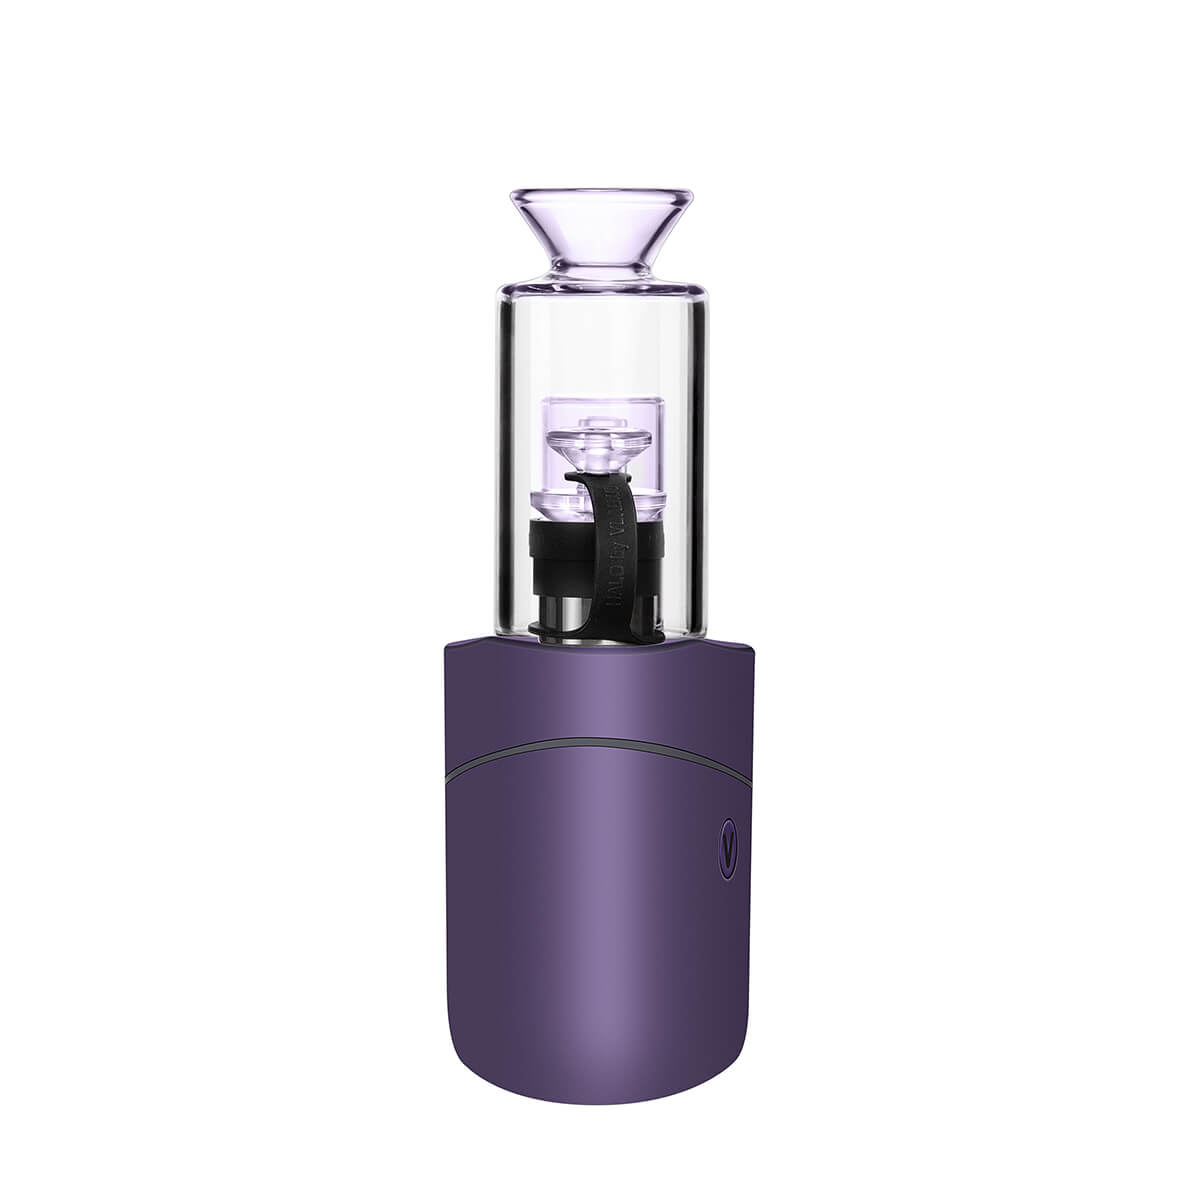 VLAB HALO Portable Vaporizer Kit in Purple - Compact E-Rig with Glass Attachment